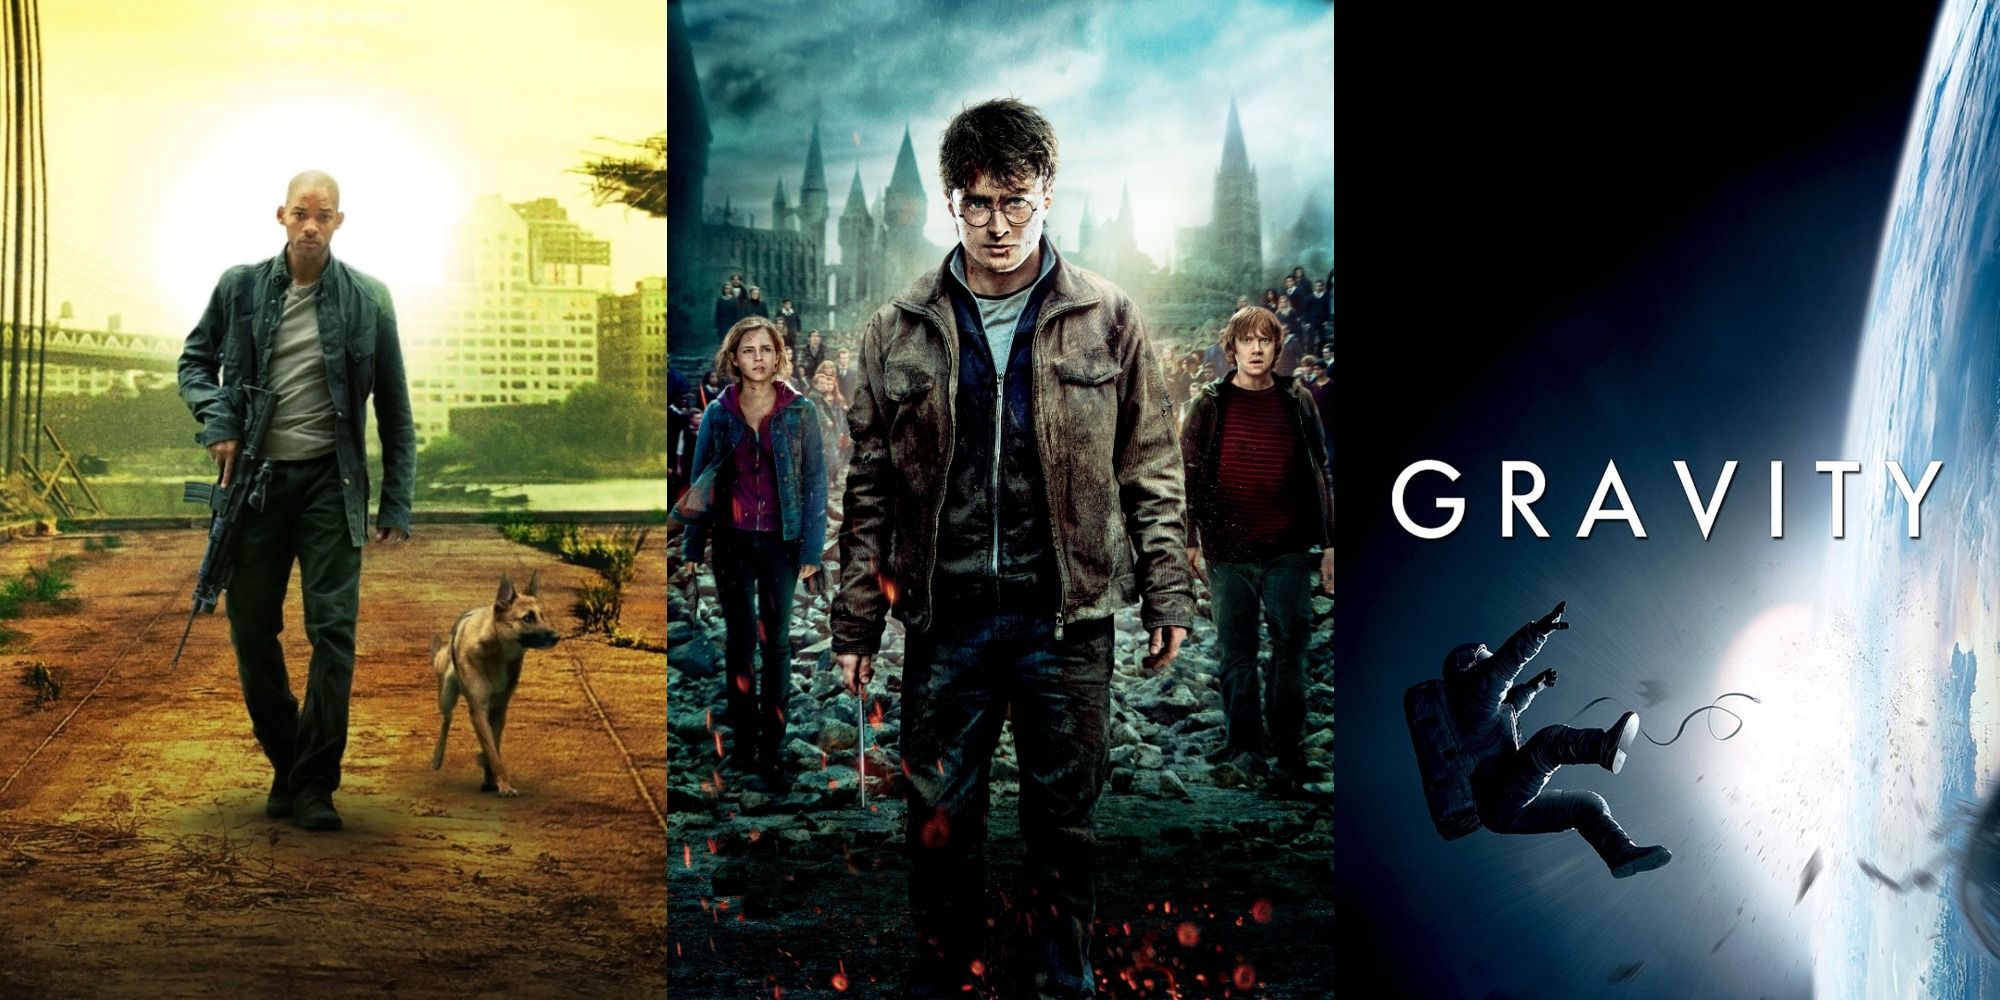 combined posters of Harry Potter, I Am Legend, and Gravity from producer David Heyman